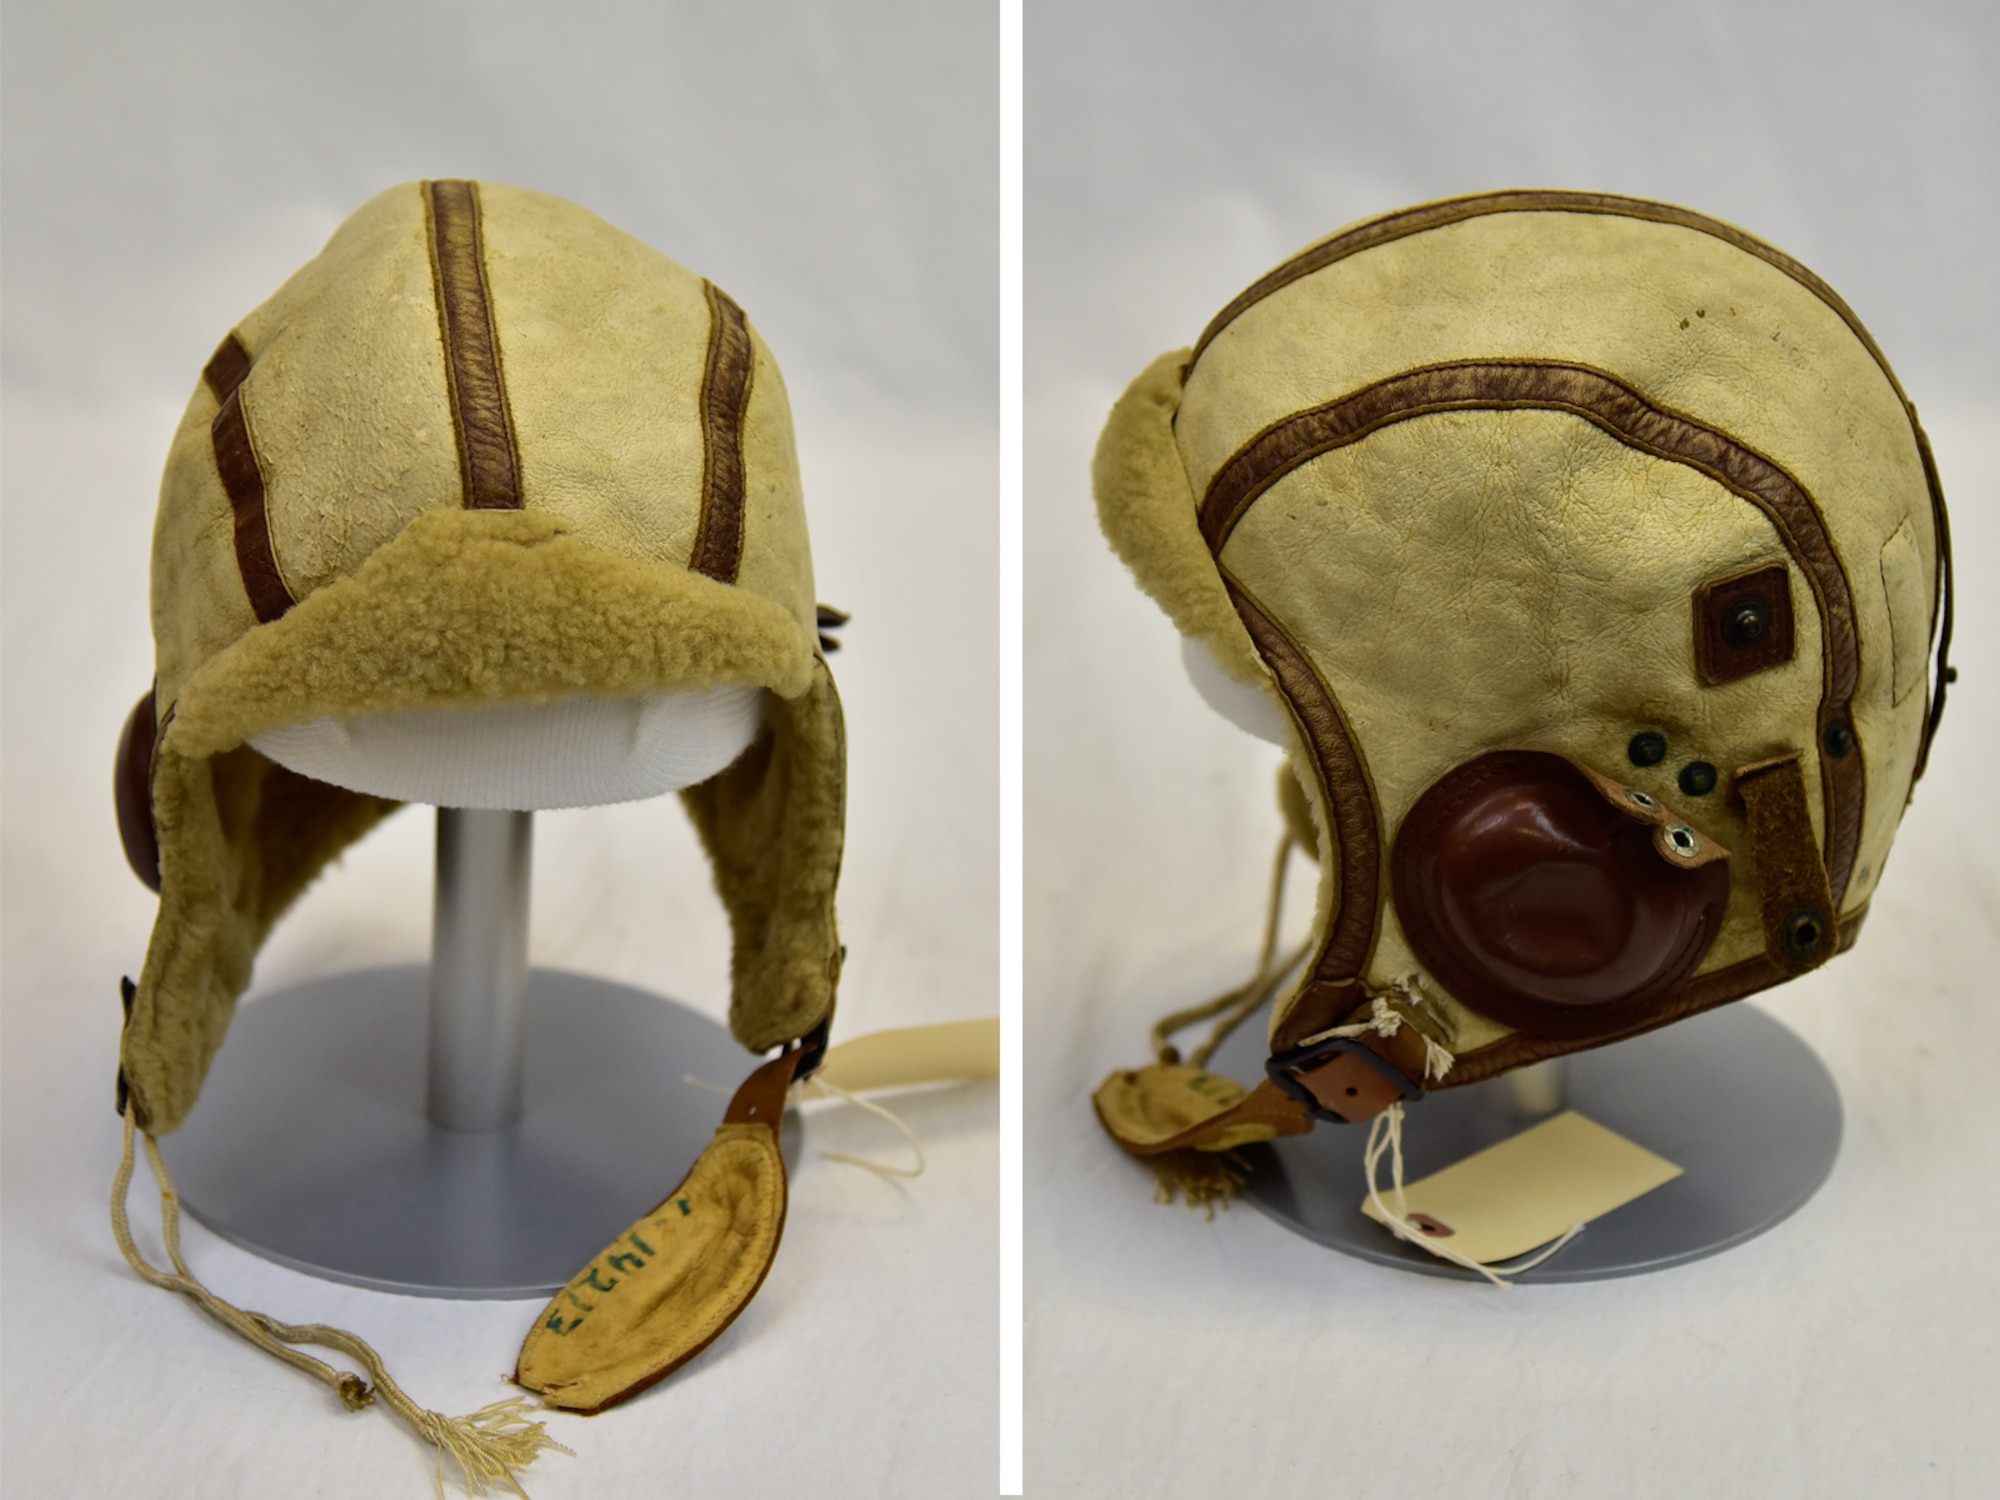 National Museum of the USAF-Plans call for this early B-5 flight helmet to be displayed near the Memphis Belle™ as part of the new strategic bombardment exhibit in the WWII Gallery, which opens to the public on May 17, 2018. Some of the Eighth Air Force bomber crewmen wore these in 1942 and early 1943. (U.S. Air Force photo by Ken LaRock)